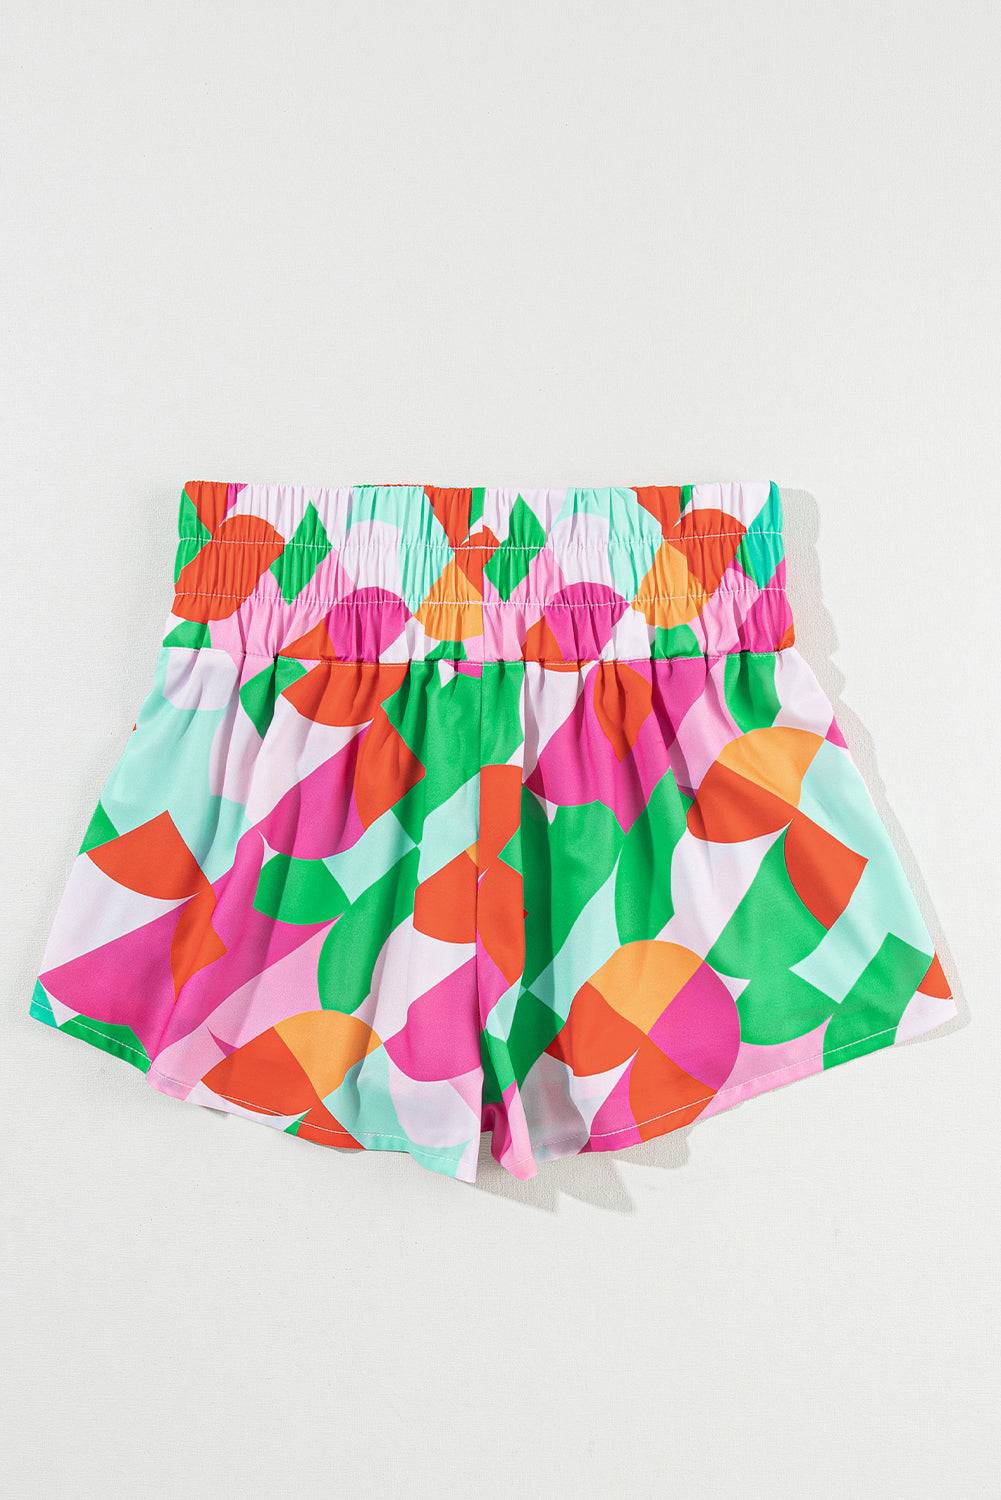 a pair of colorful shorts on a white background